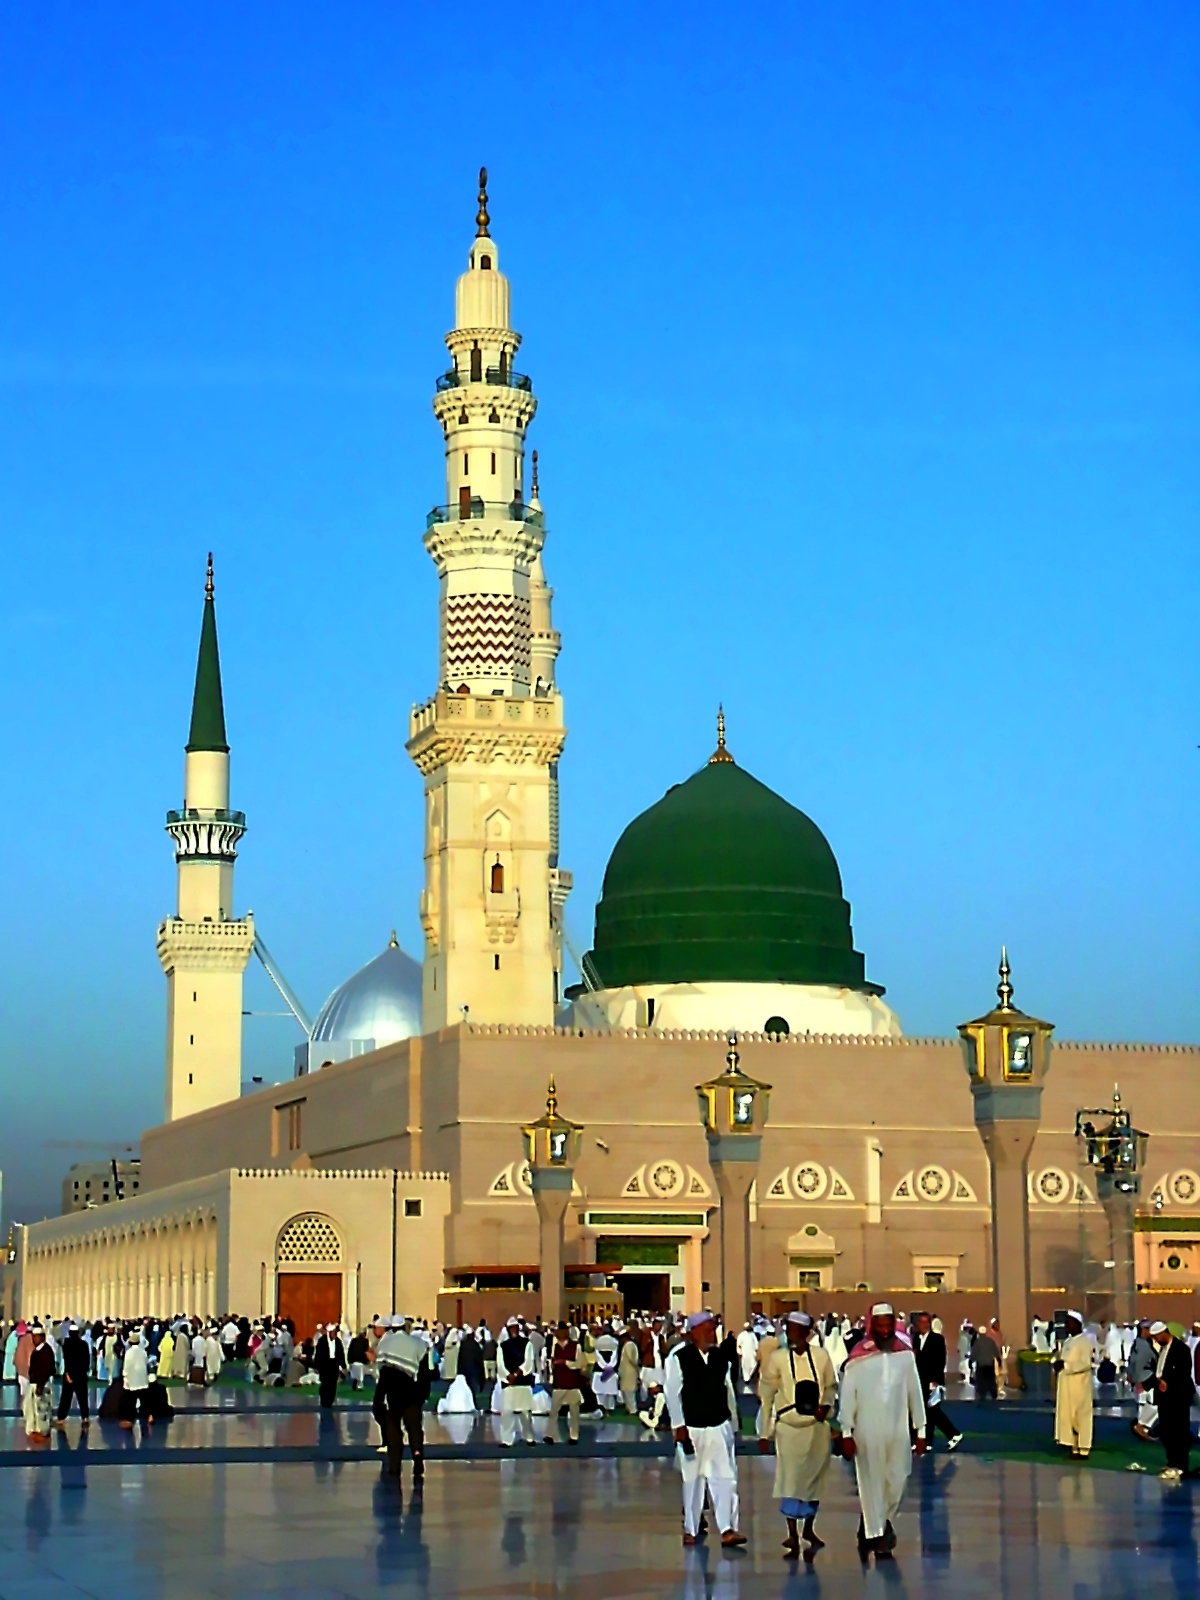 What did first Oqba pledge for spread Islam? Announcement, locality computer science, tribe meaning in English, tribe review and quranmualim. Learn Quran, Quran translation, Quran mp3,quran explorer, Quran download, Quran translation in Urdu English to Arabic, Al Mualim, Quranmualim, V Islam pictures, Islam symbol, Shia Islam, Sunni Islam, Islam facts, Islam beliefs and practices Islam religion history, Islam guide, prophet Muhammad quotes, prophet Muhammad biography, Prophet Muhammad family tree.